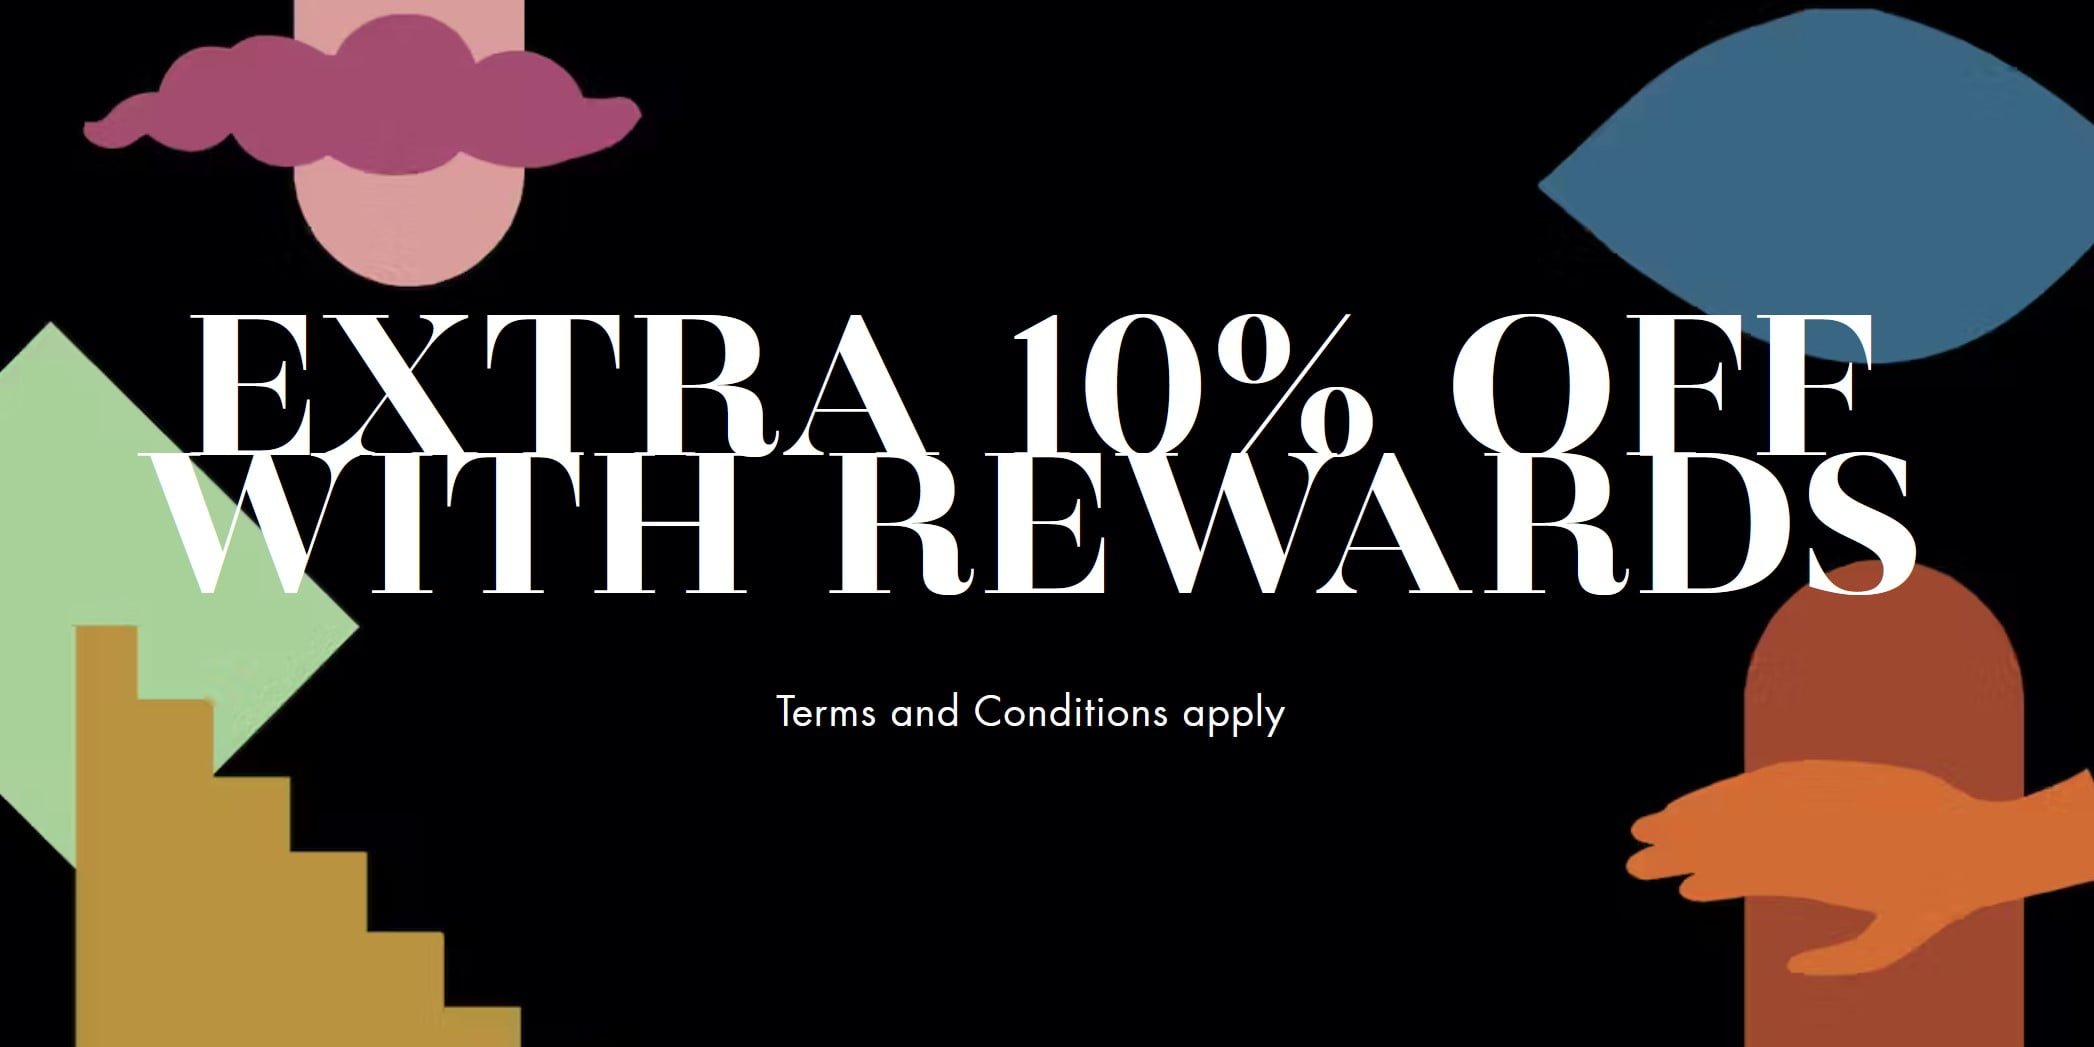 10% off Fashion & Beauty, plus an extra 10% off sale at Harvey Nichols